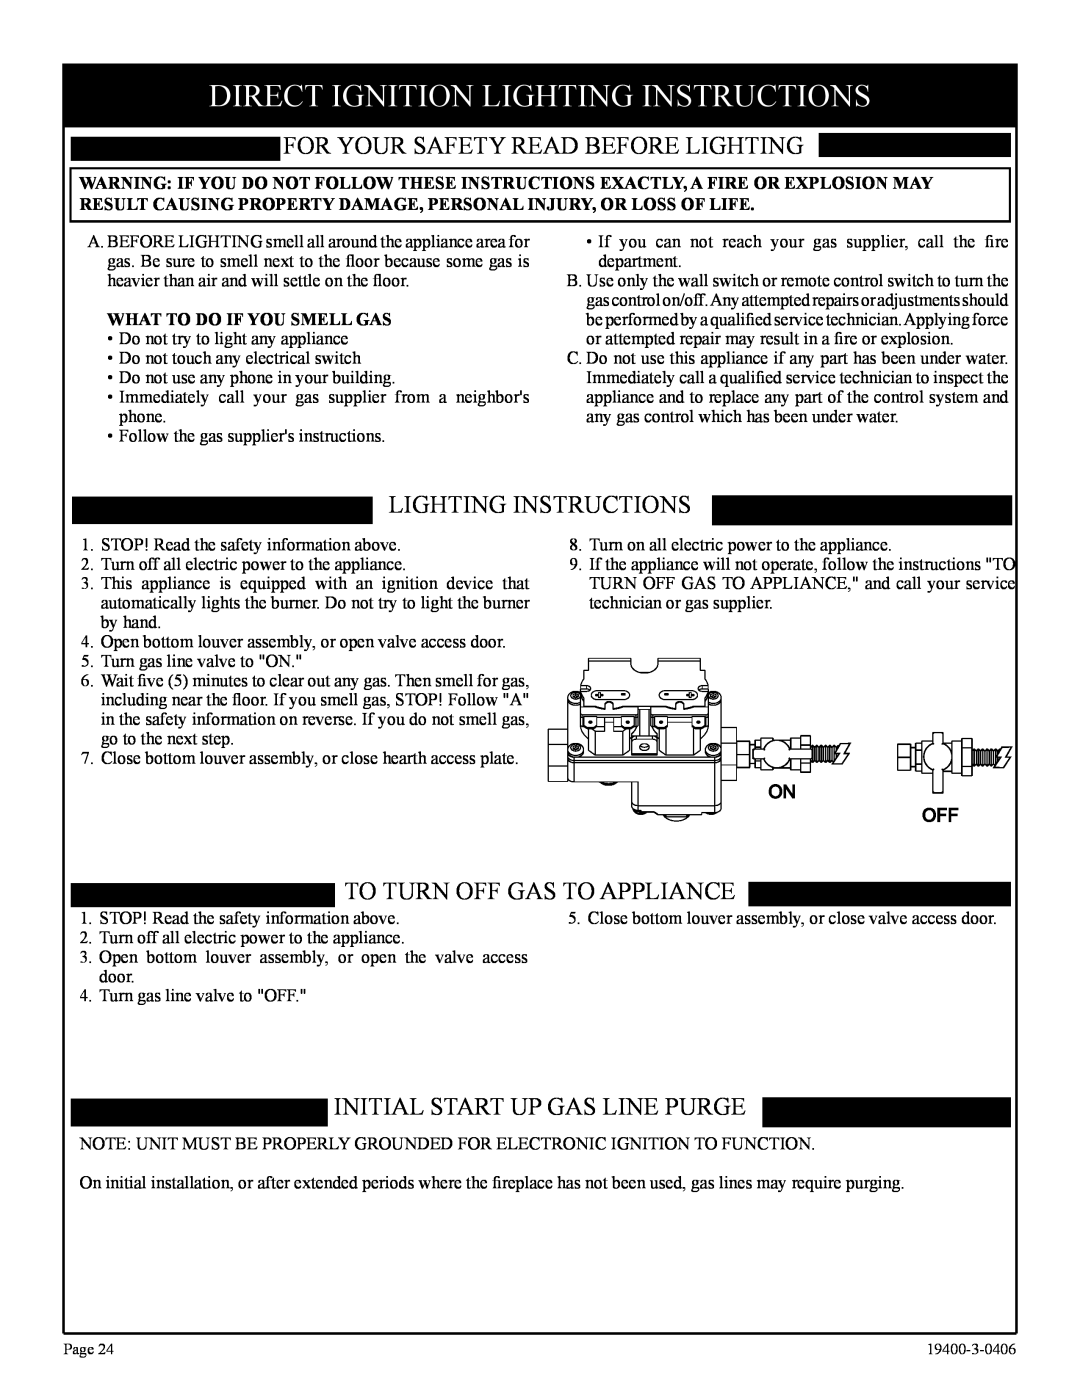 Vulcan-Hart BVP42FP52(F,L)N-1 Direct Ignition Lighting Instructions, For Your Safety Read Before Lighting 